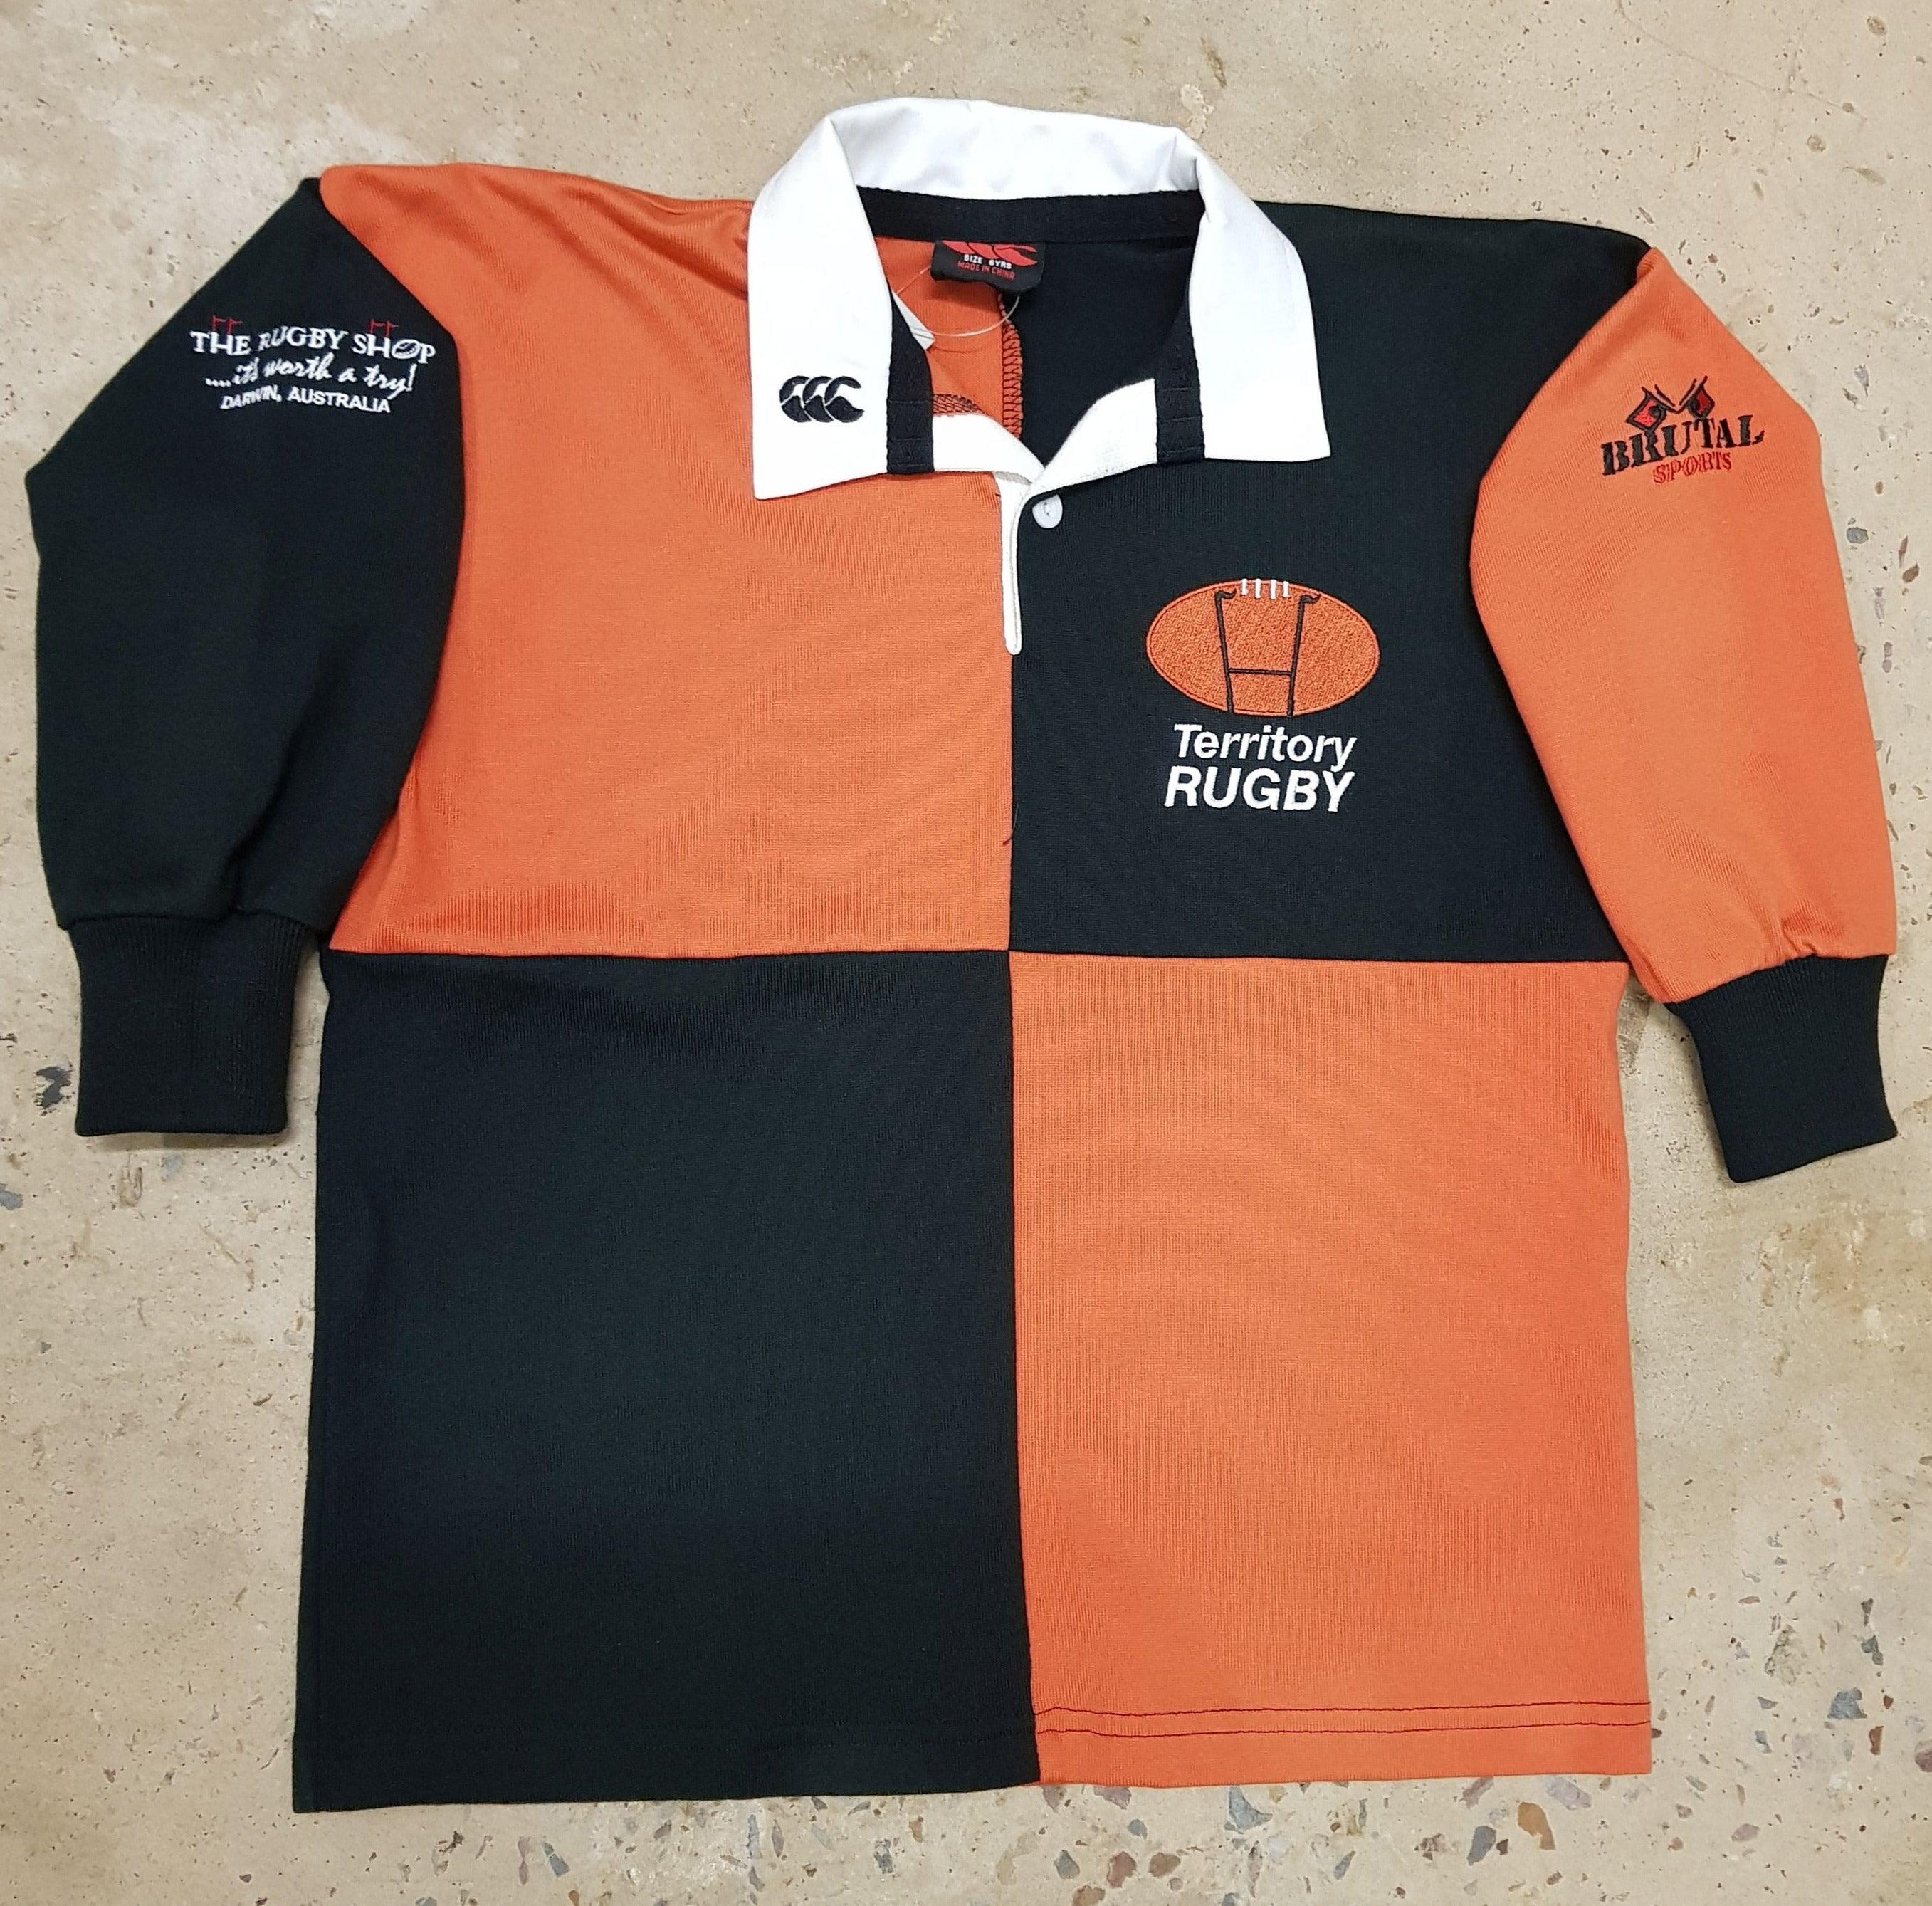 Territory Rugby Kids Harlequin Jersey - The Rugby Shop Darwin